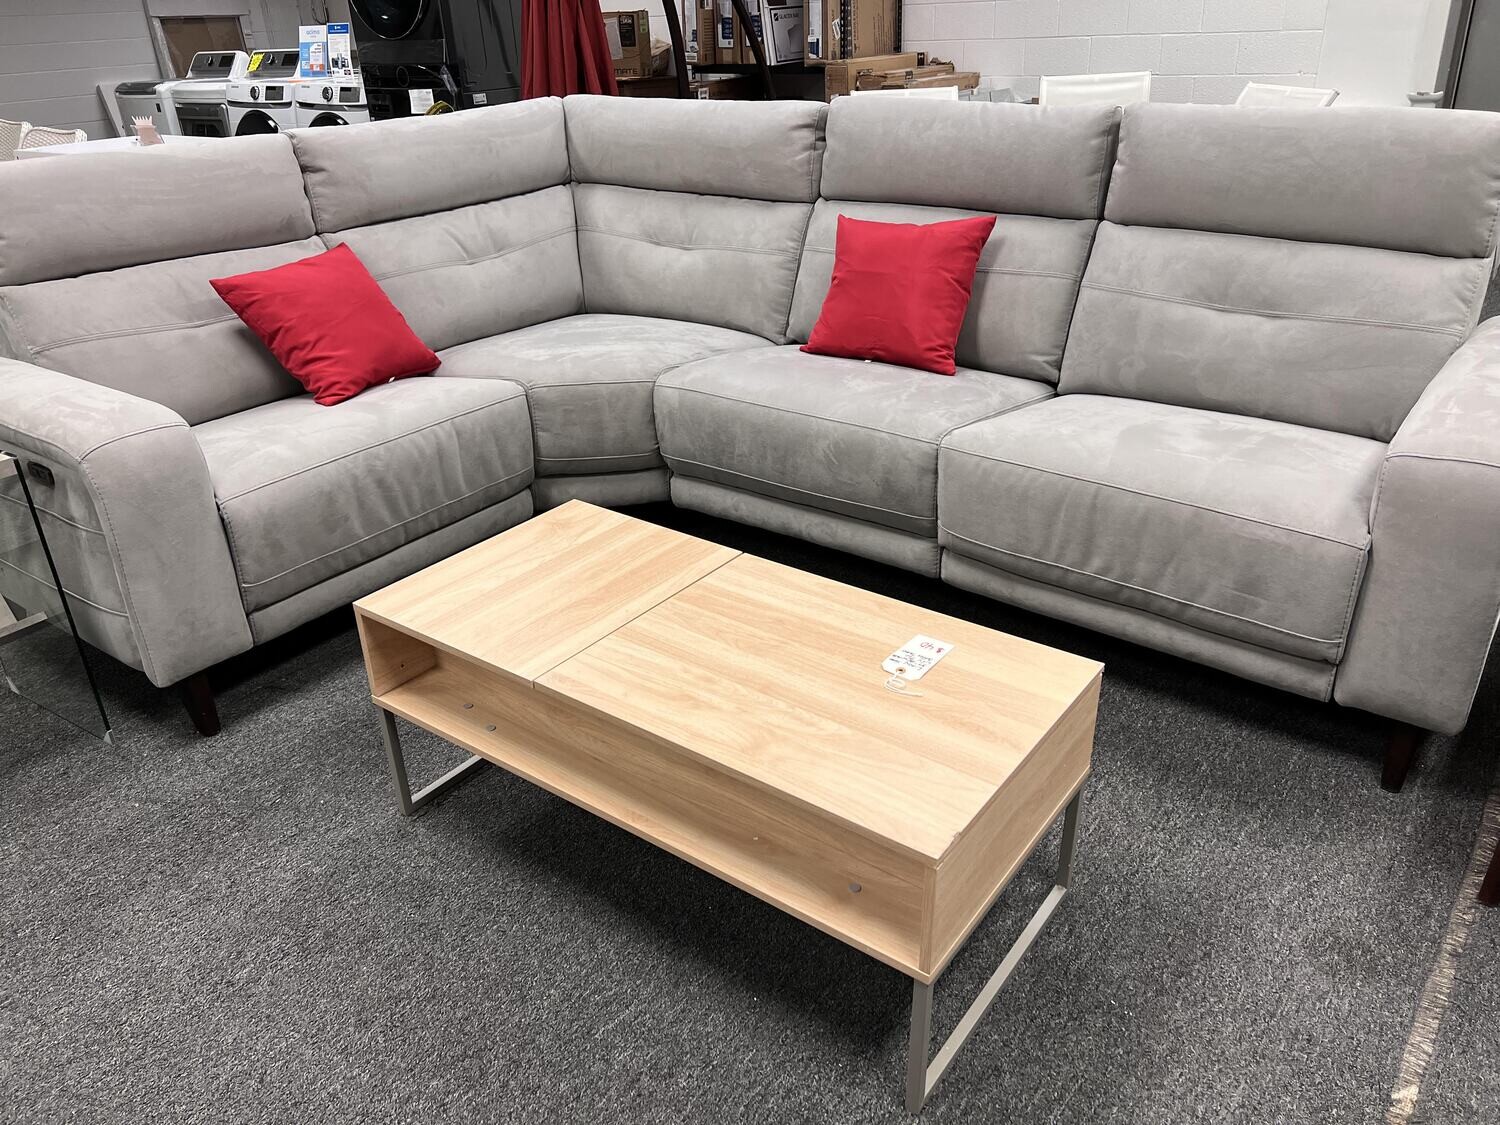 TROWER FABRIC POWER SECTIONAL